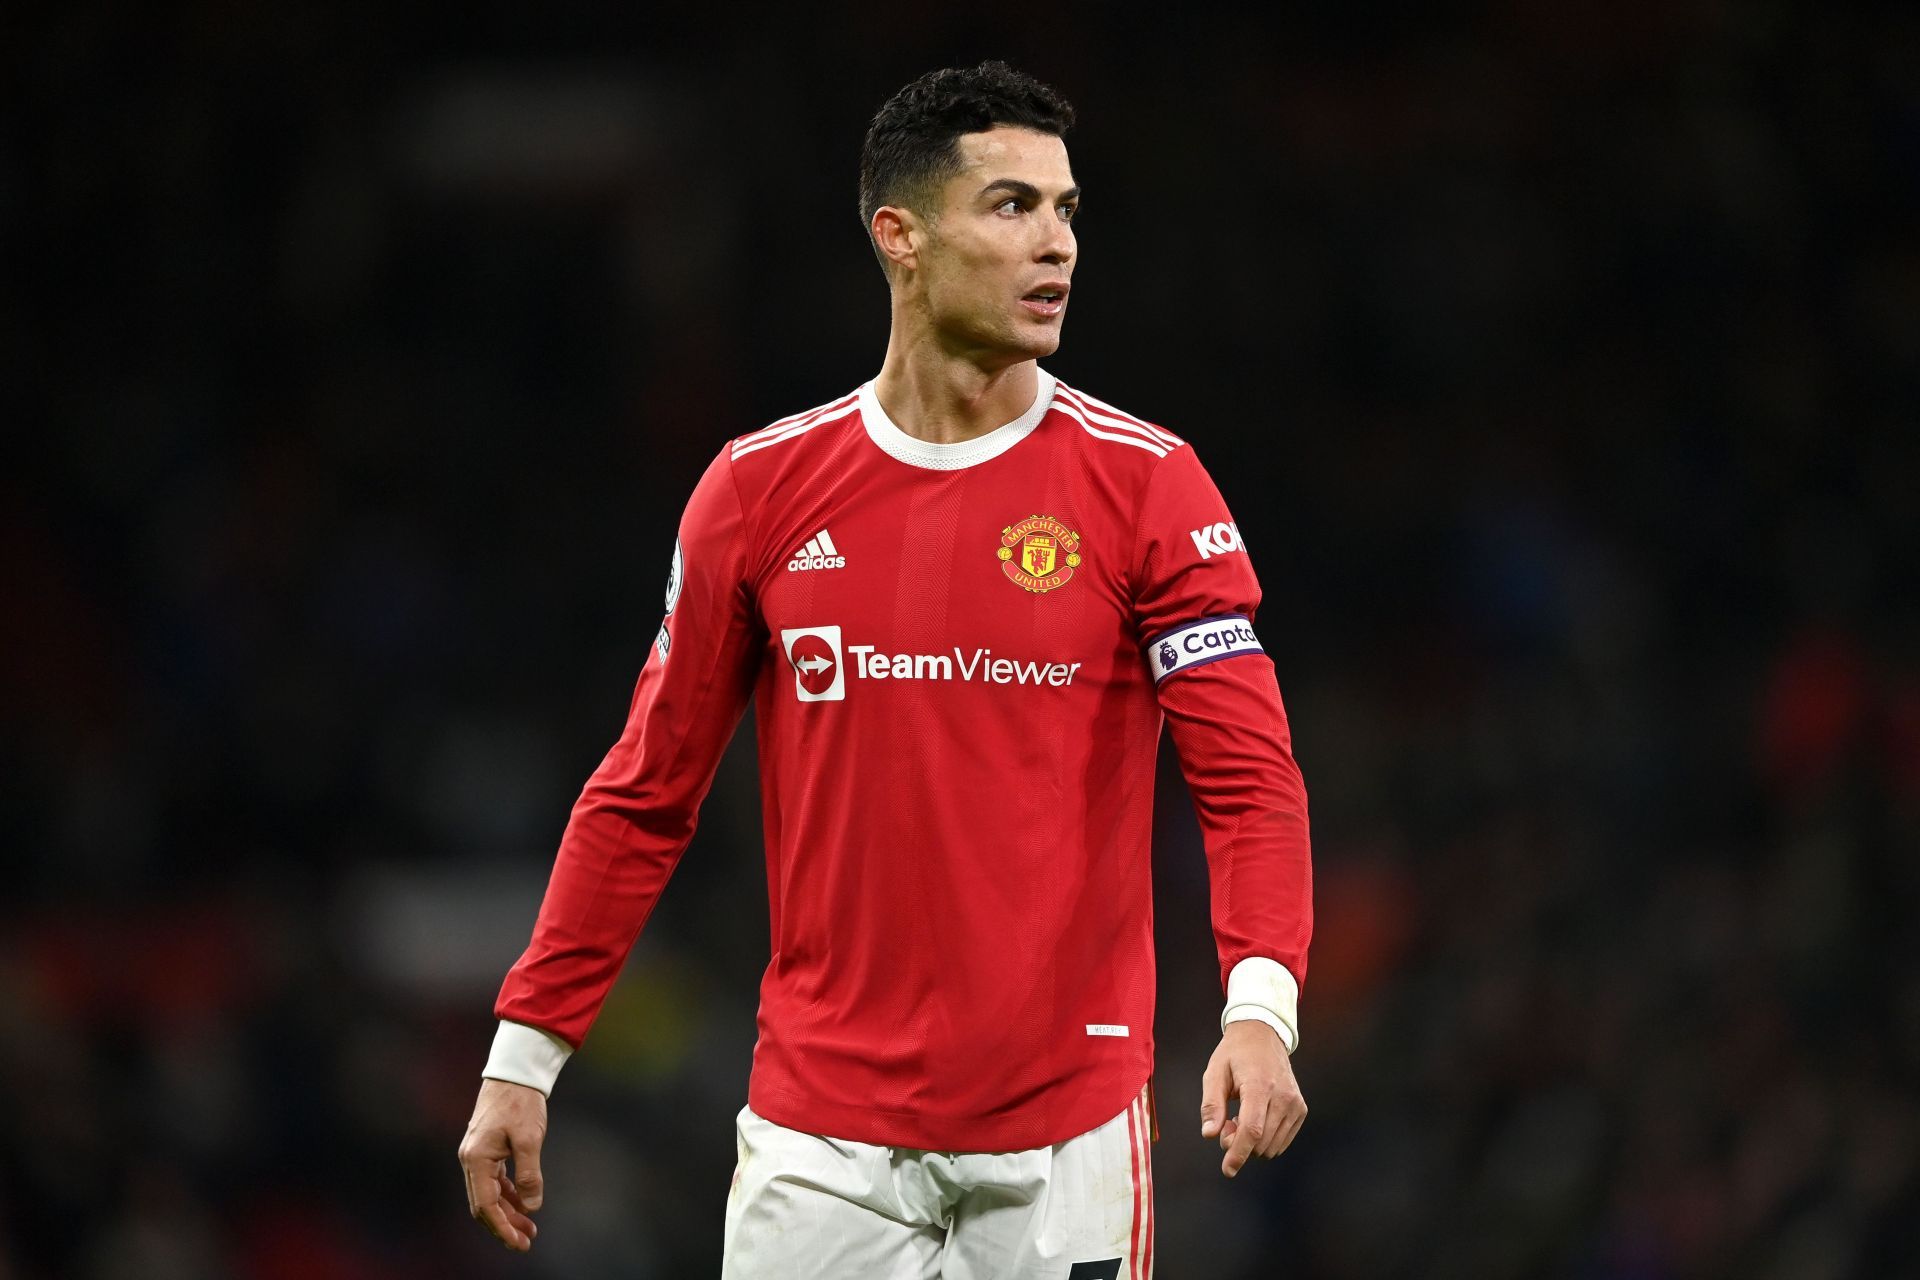 Trevor Sinclair believes Cristiano Ronaldo (in pic) has become a big problem at Manchester United.